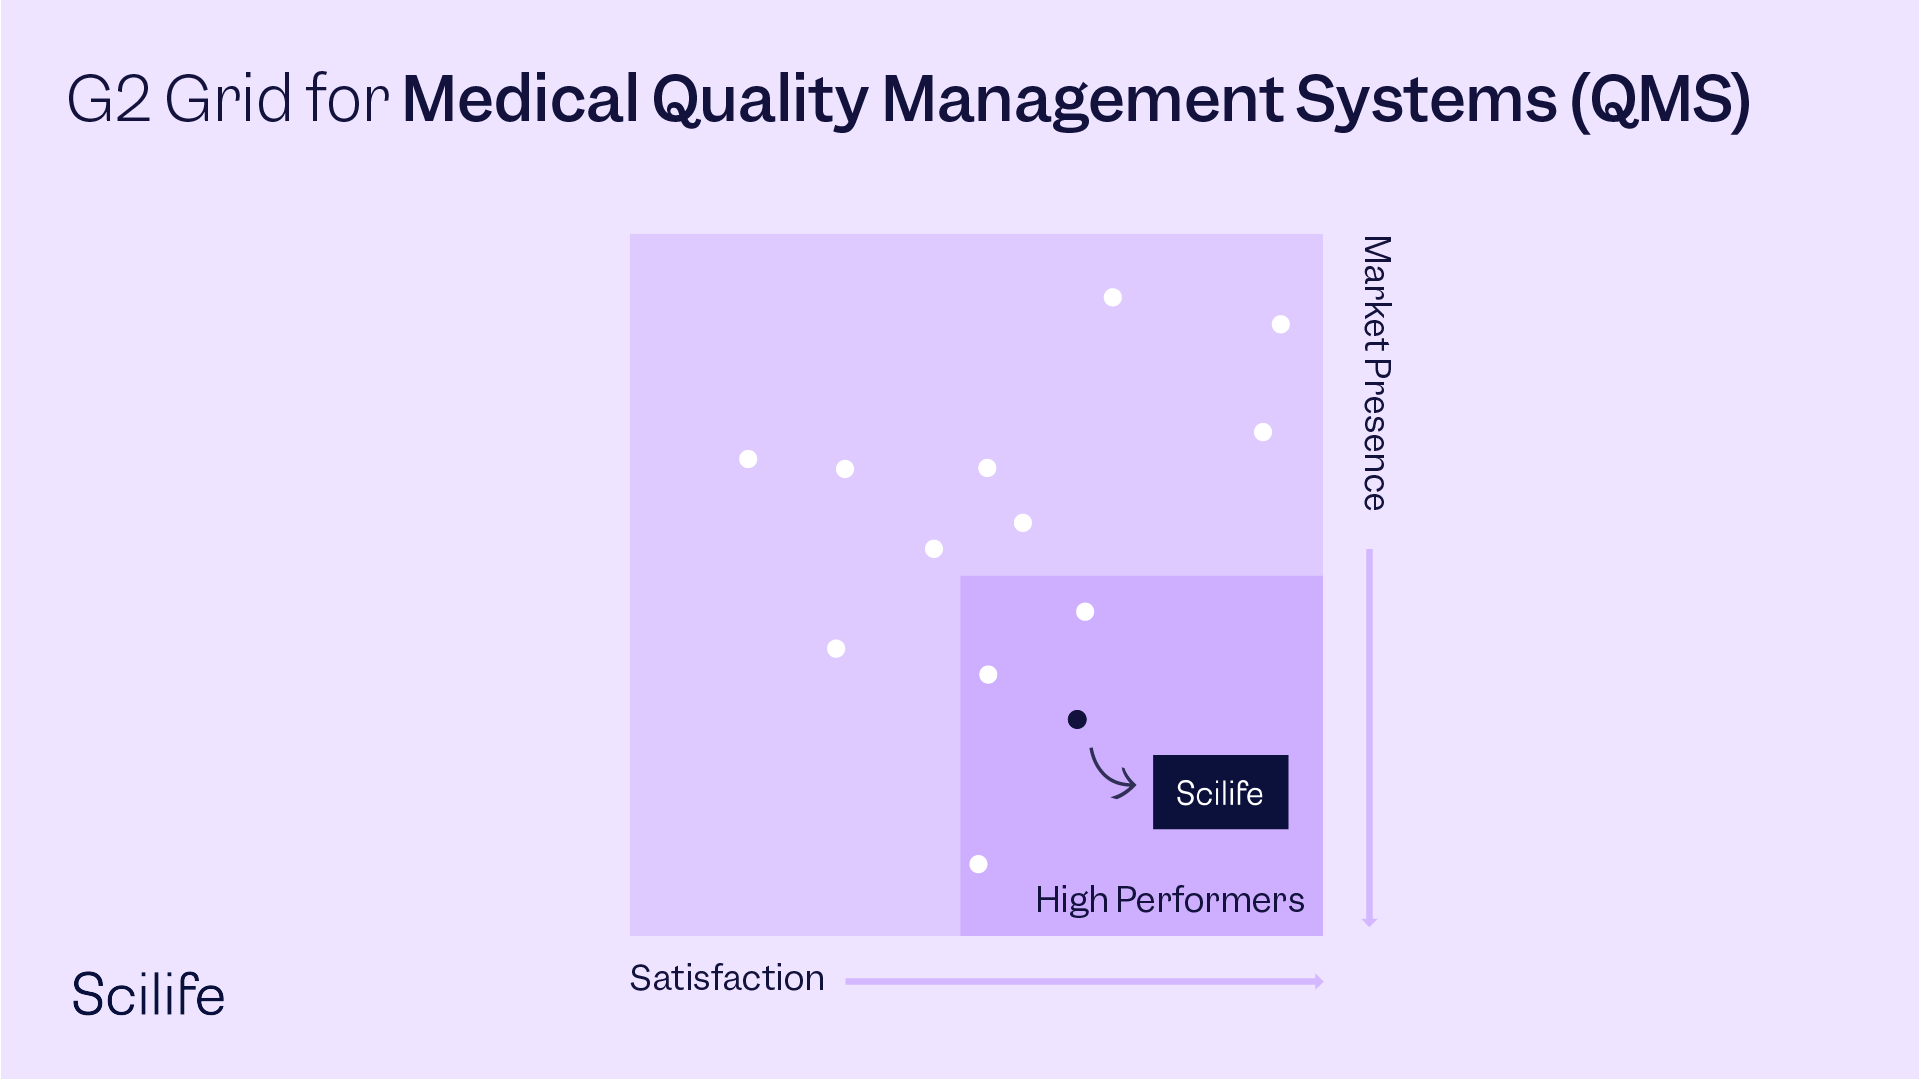 Infographic that represents Scilife's position in the Market compared to other Medical Quality Management Systems (QMS)